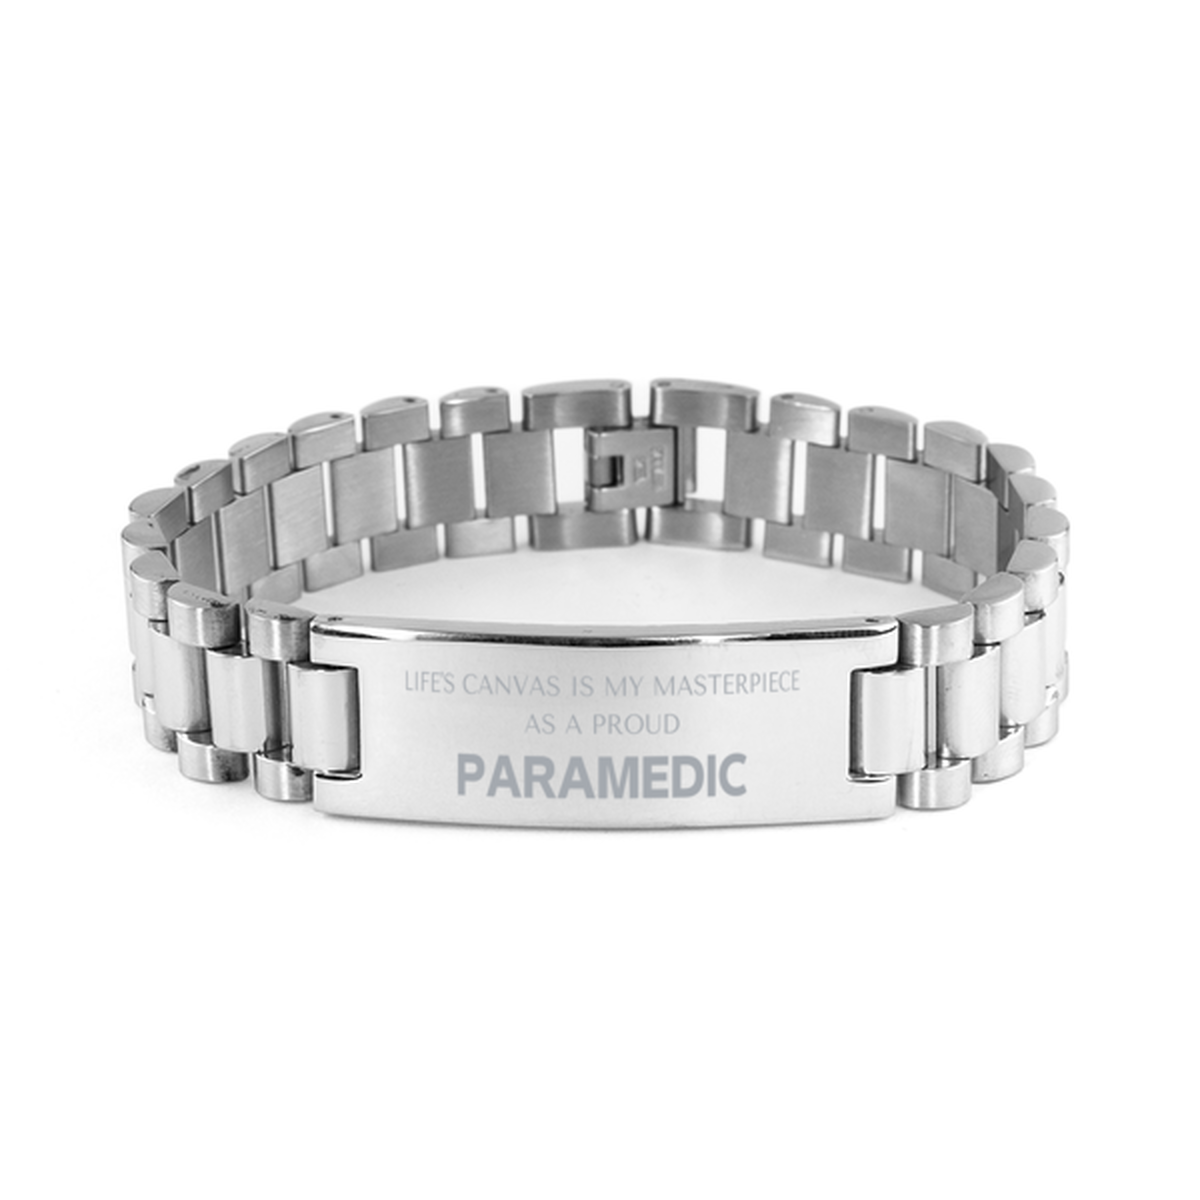 Proud Paramedic Gifts, Life's canvas is my masterpiece, Epic Birthday Christmas Unique Ladder Stainless Steel Bracelet For Paramedic, Coworkers, Men, Women, Friends